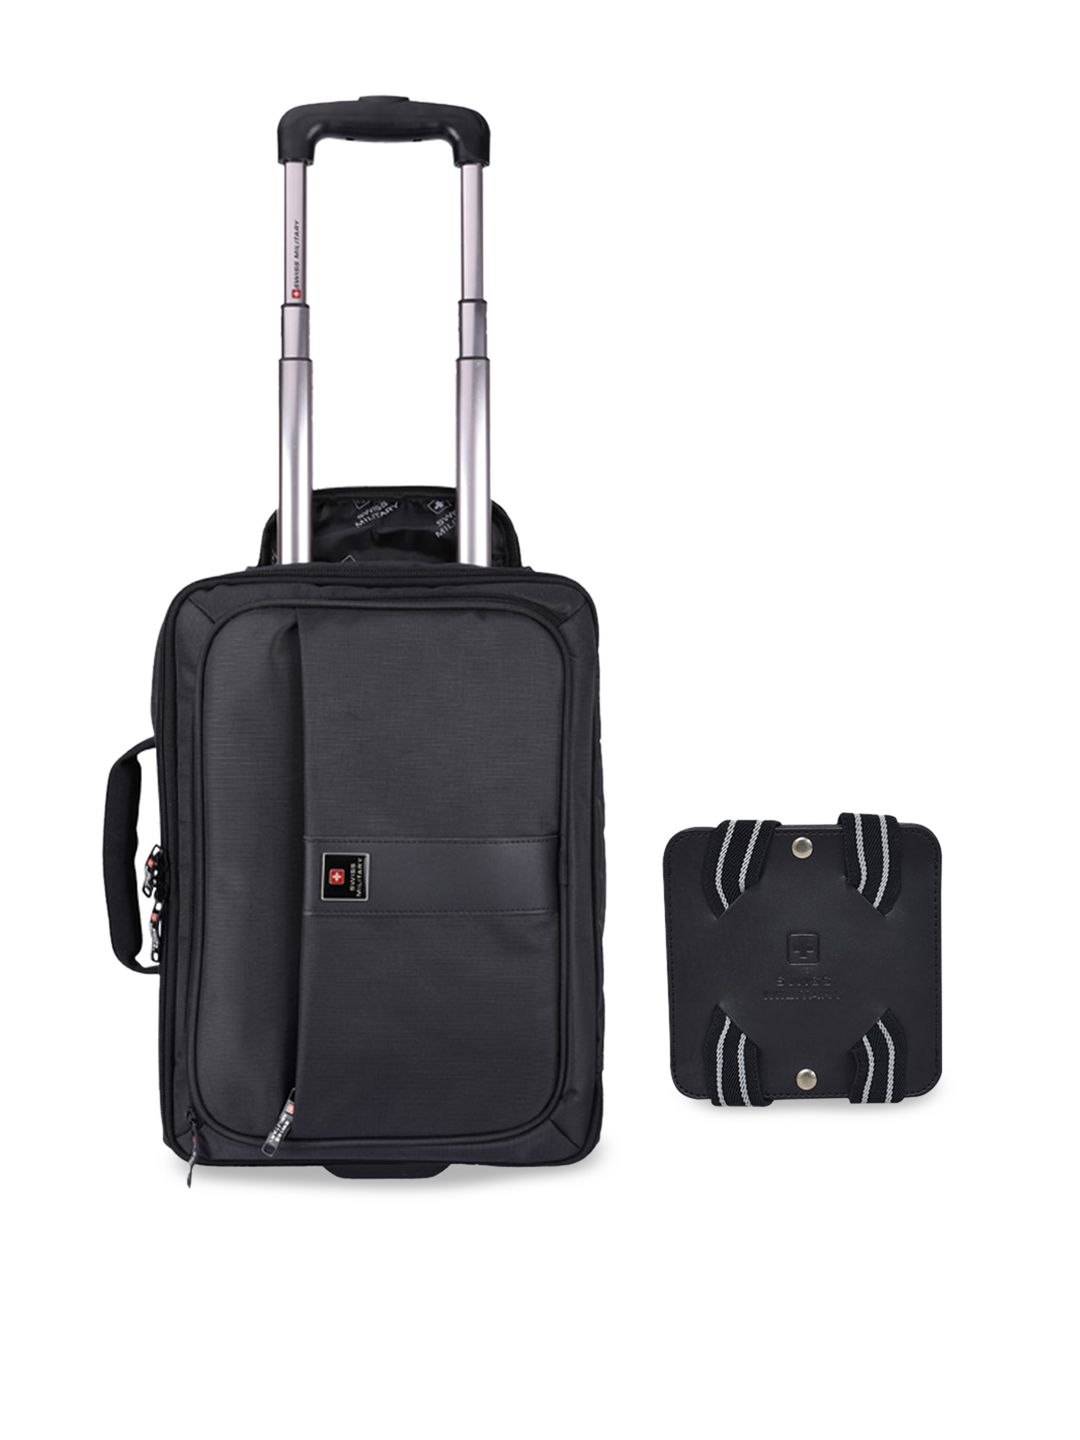 SWISS MILITARY Black Softsided Briefcase & Travel Luggage Belt Combo Pack Price in India